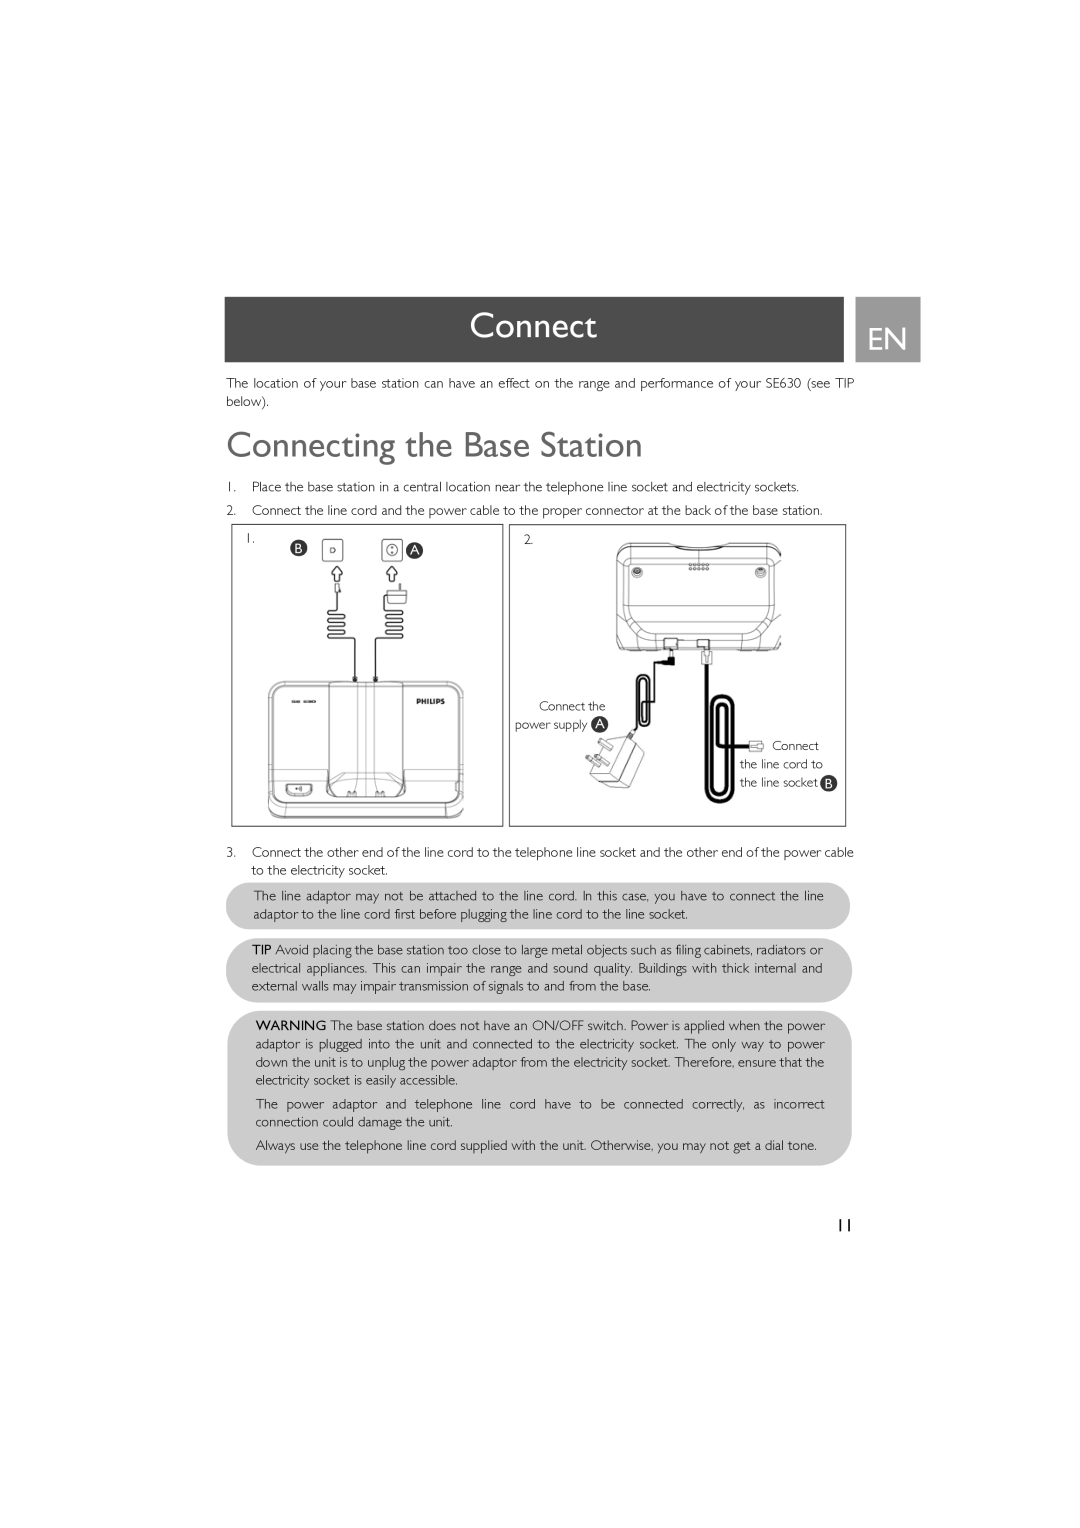 Philips SE630 manual ConnectEN, Connecting the Base Station 